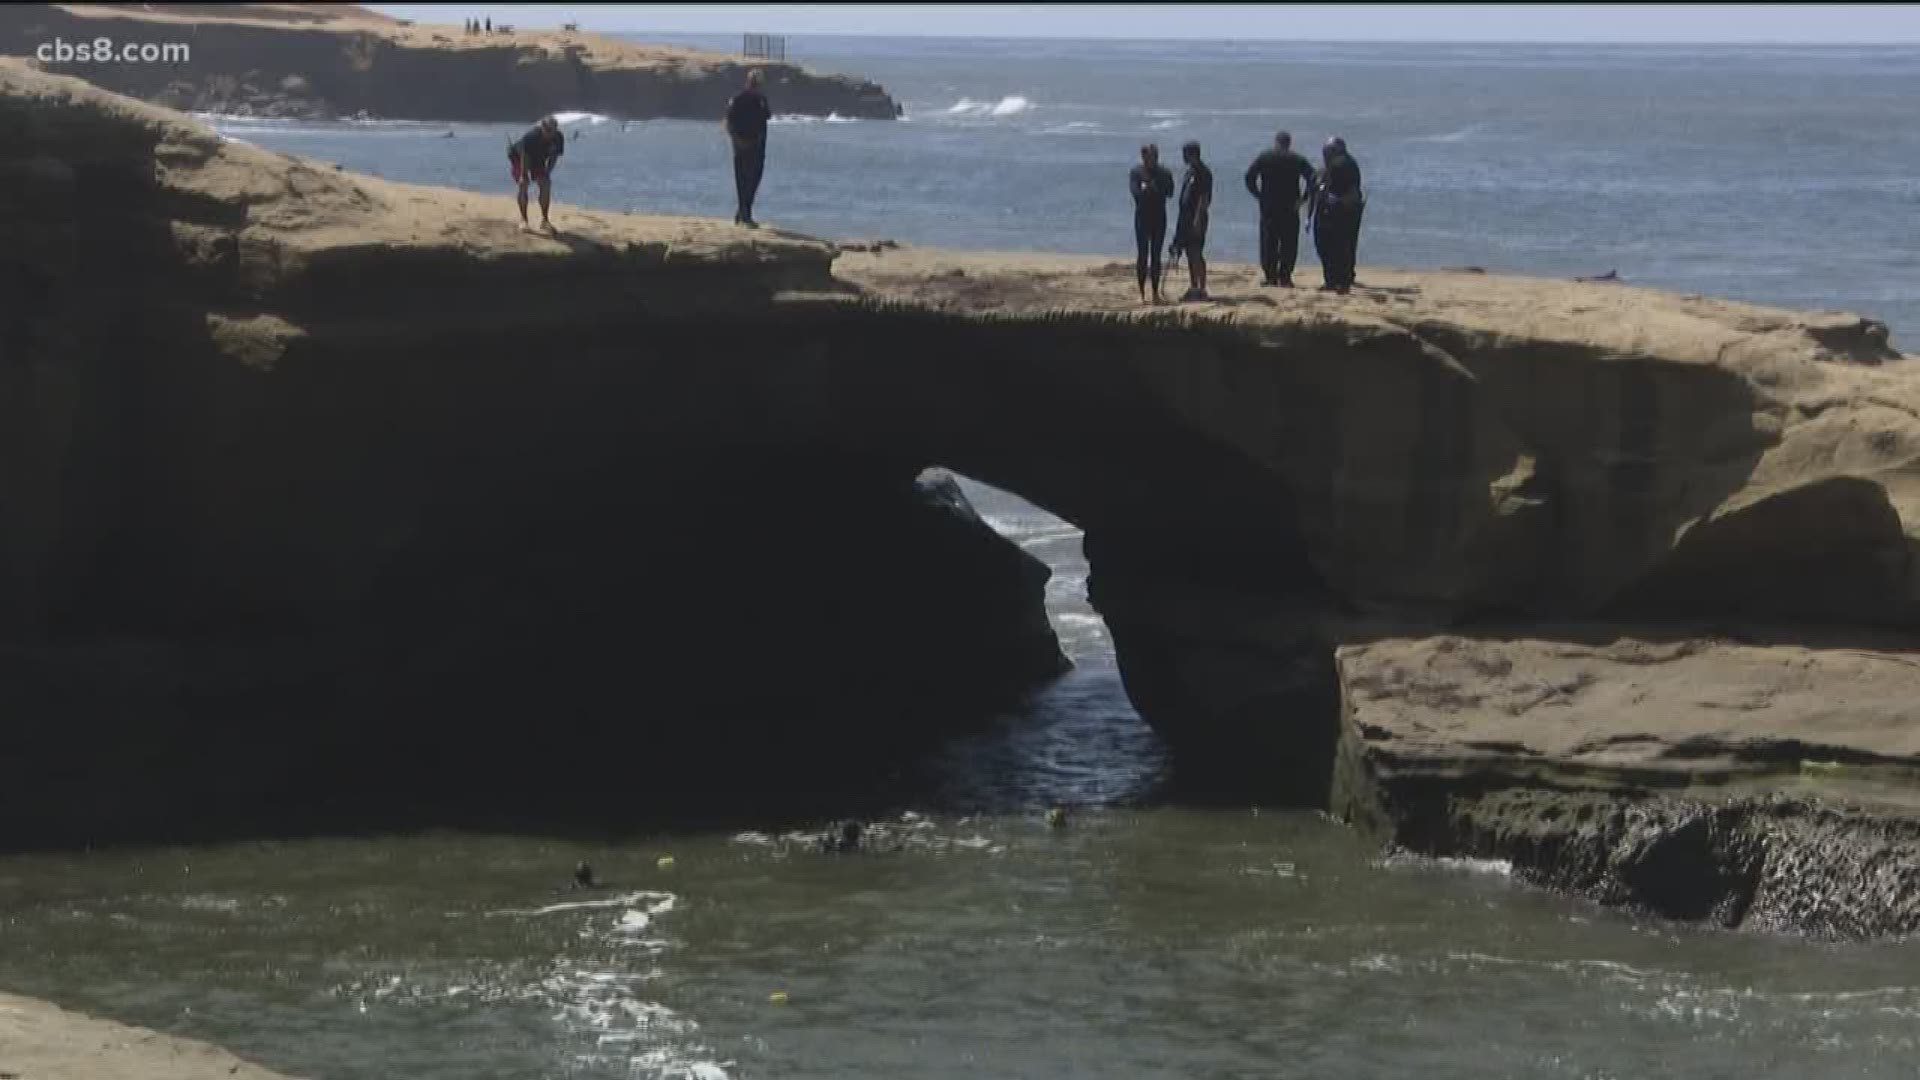 The 15-year old jumped off a cliff into the water and was not able to swim in the rough surf.